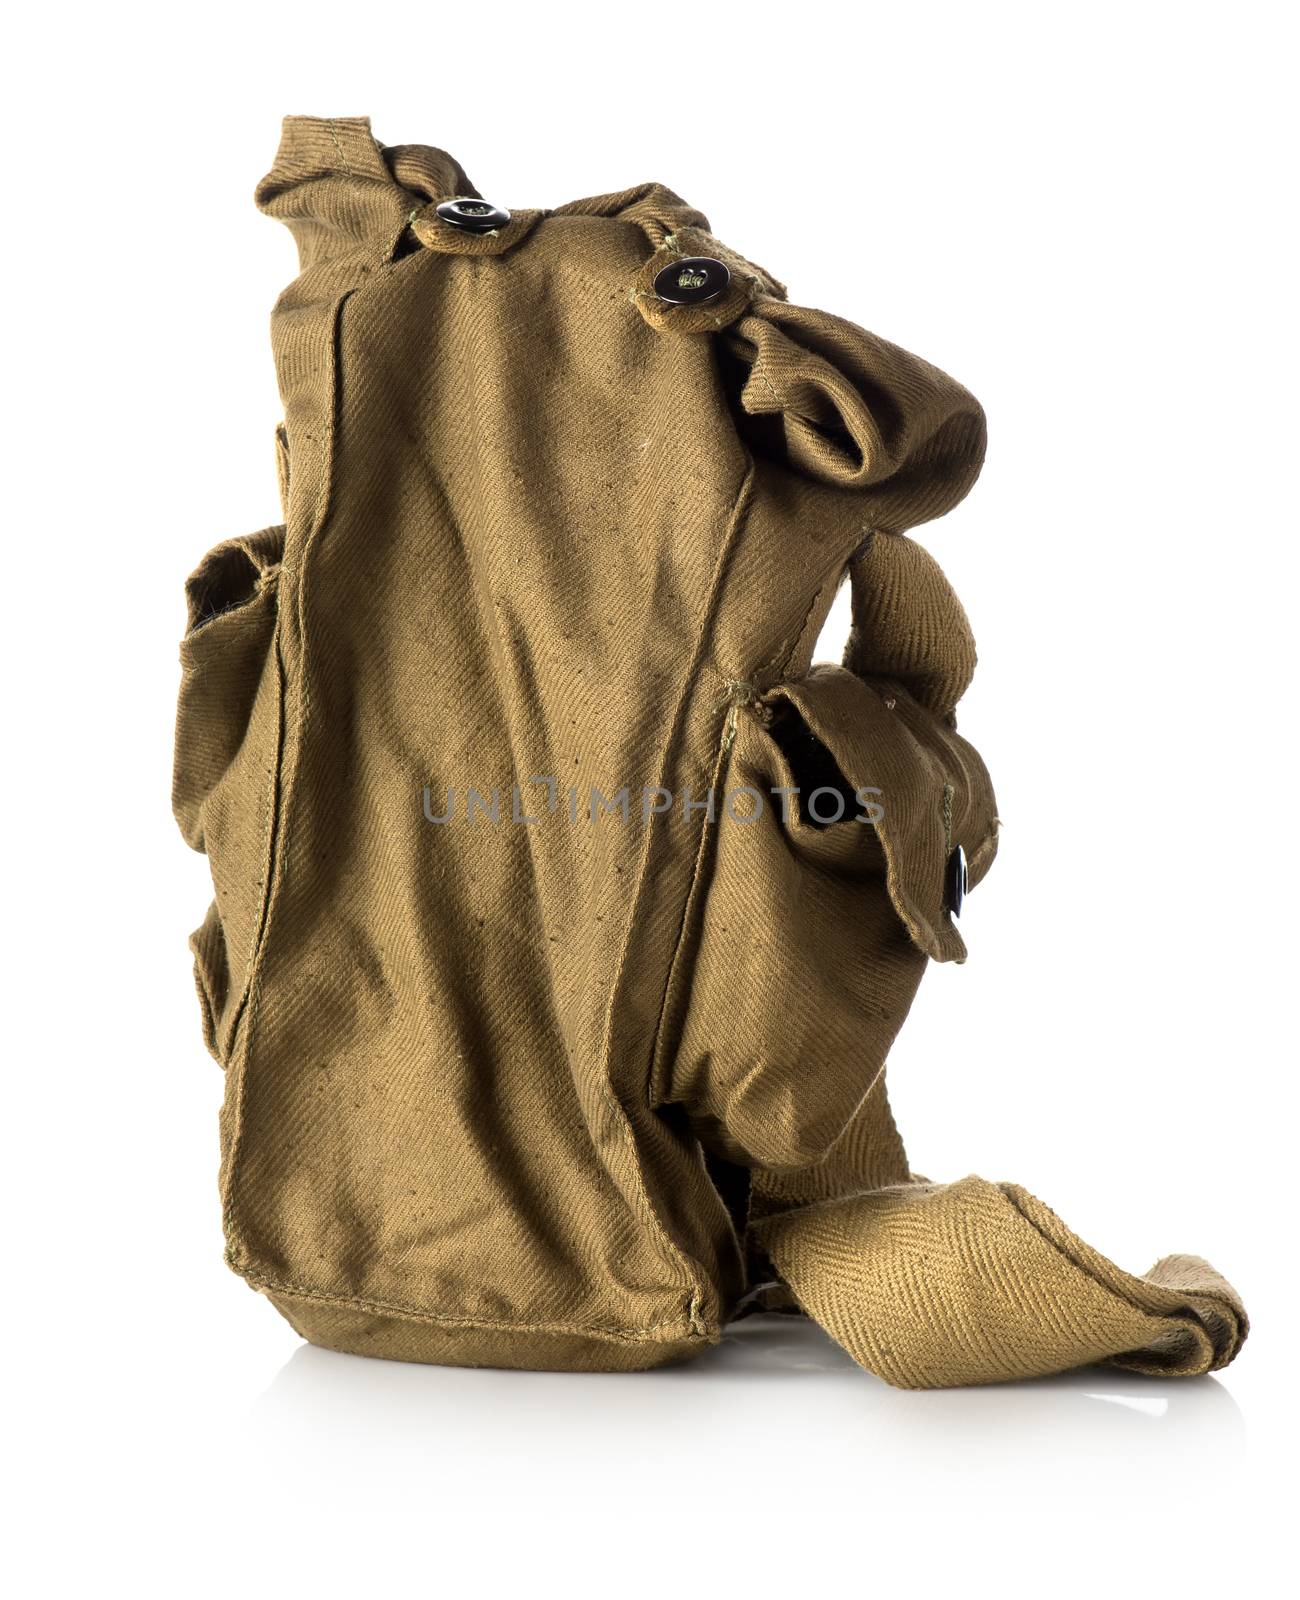 Bag of gas mask isolated on white background